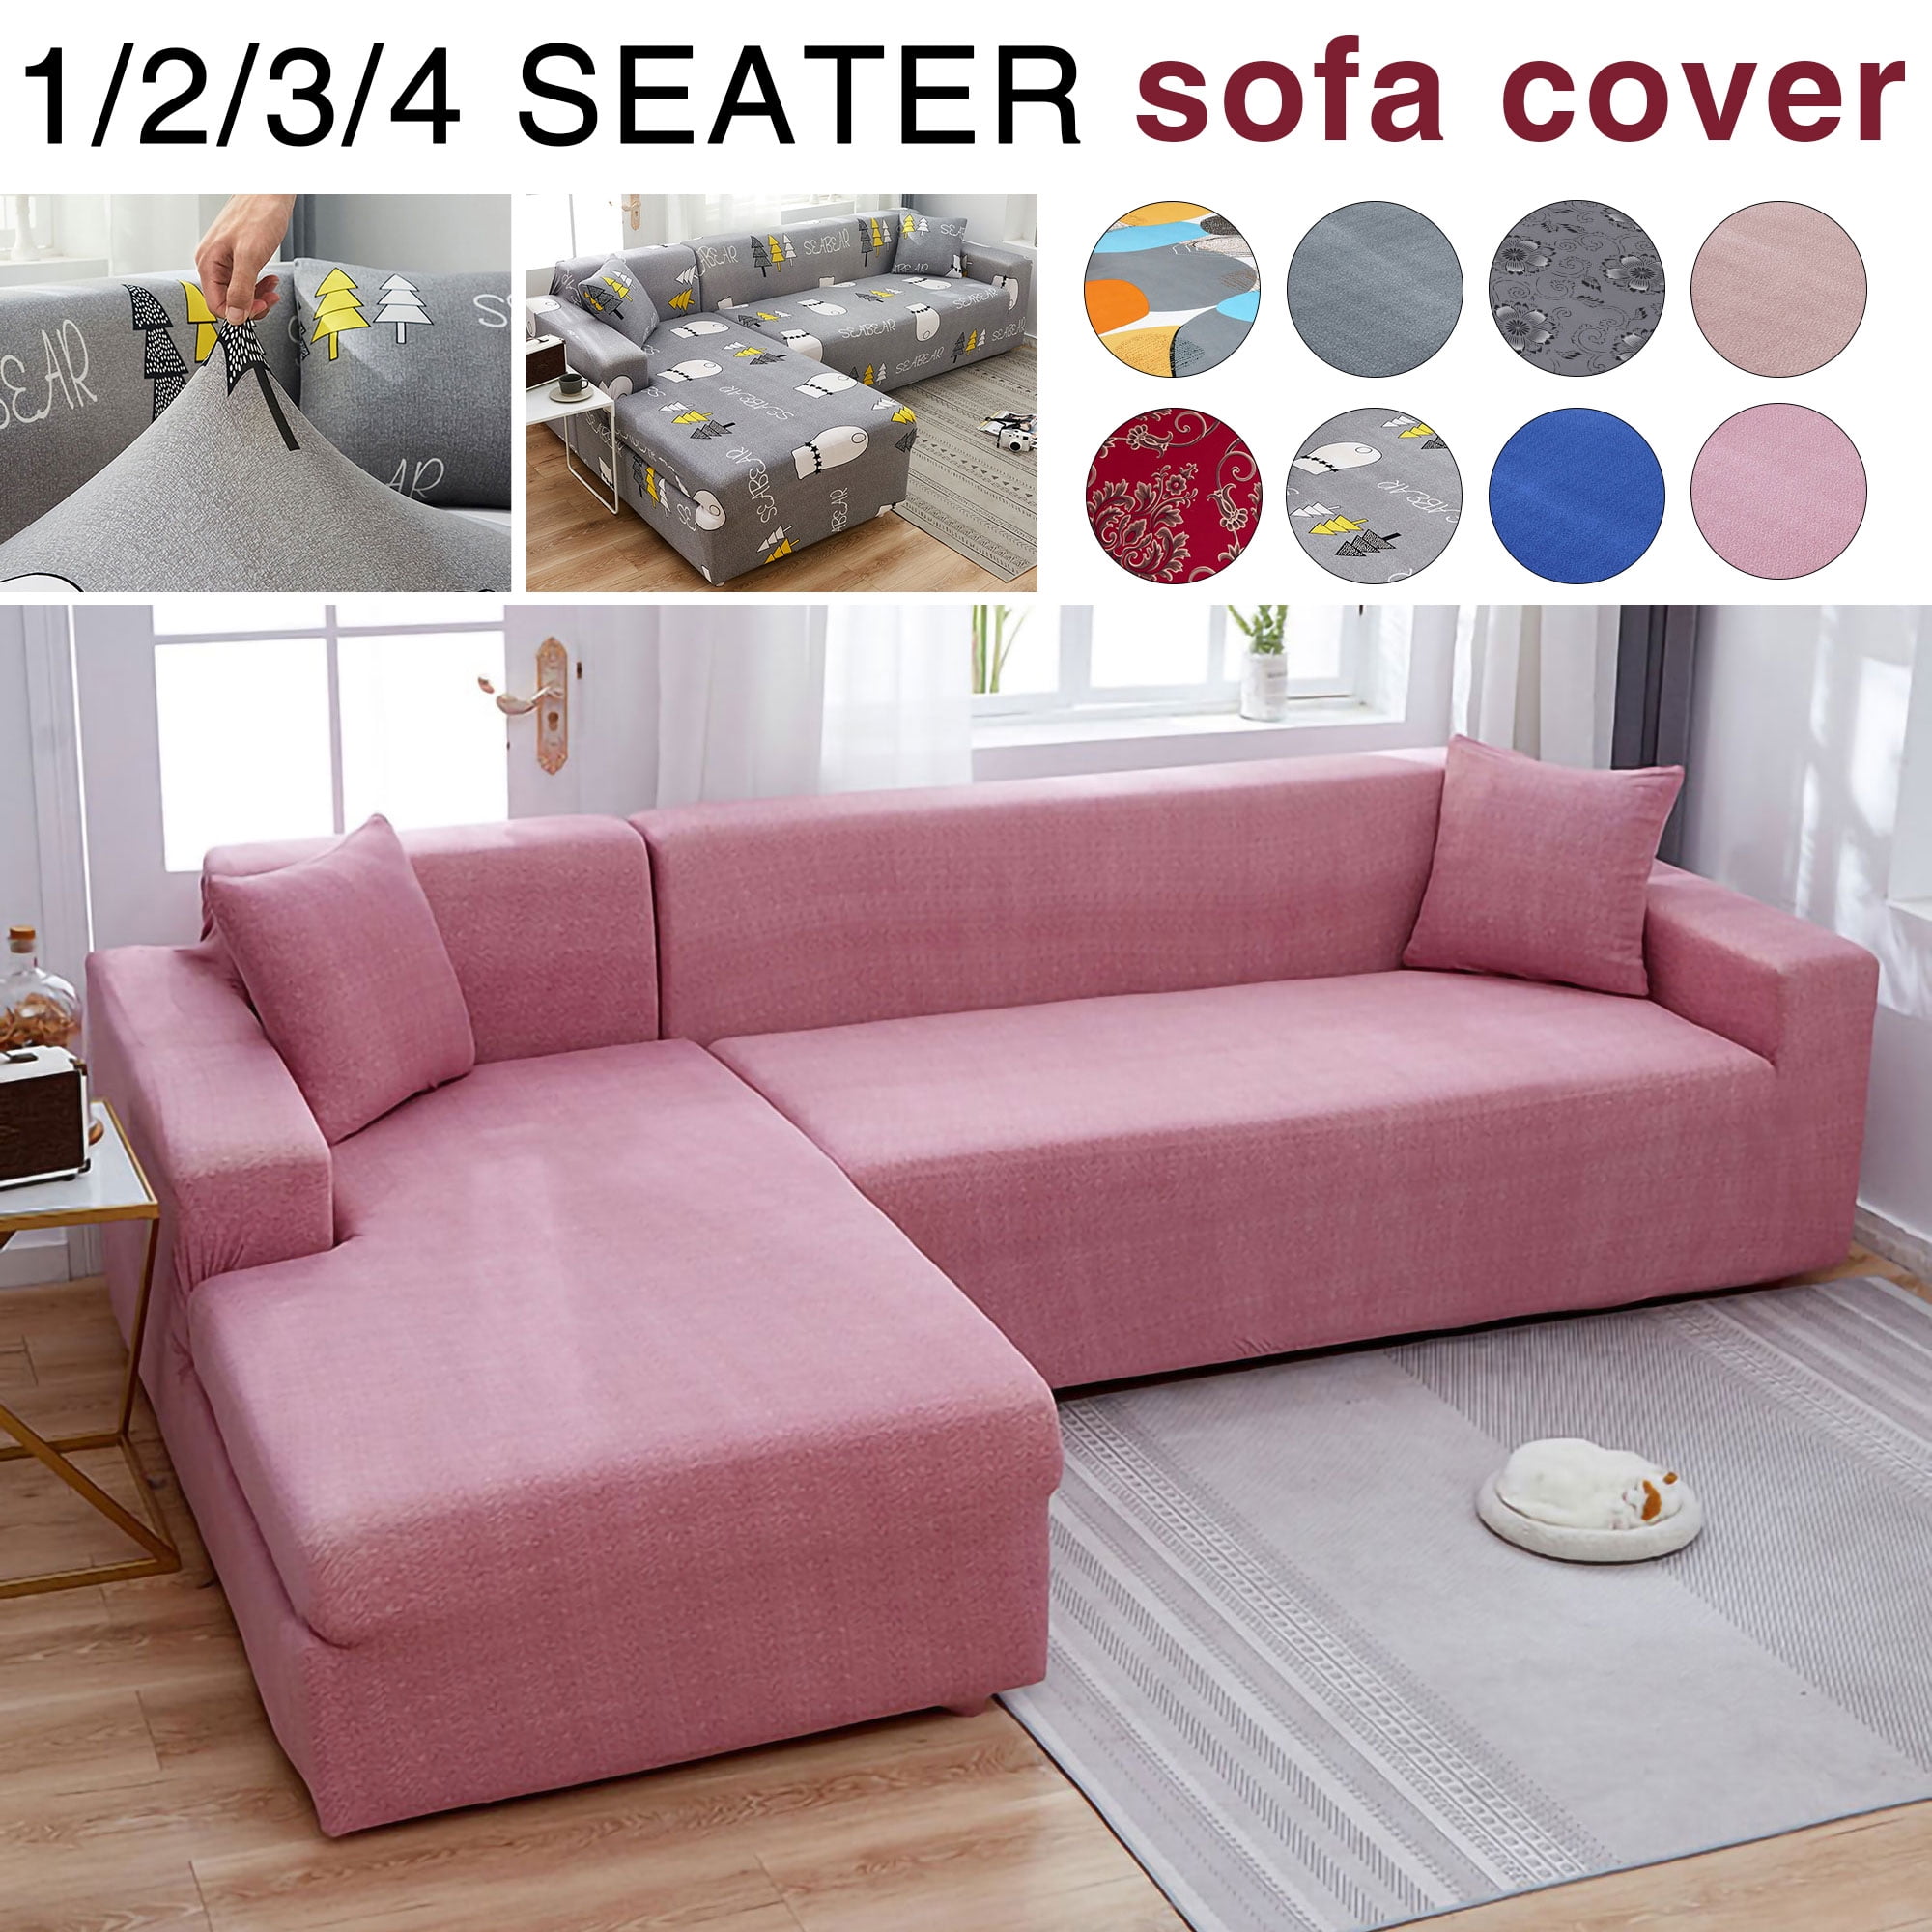 Elastic Sofa Seat Covers 1/2/3/4 Seat Slipcover Couch Cushion Bottom Protector 